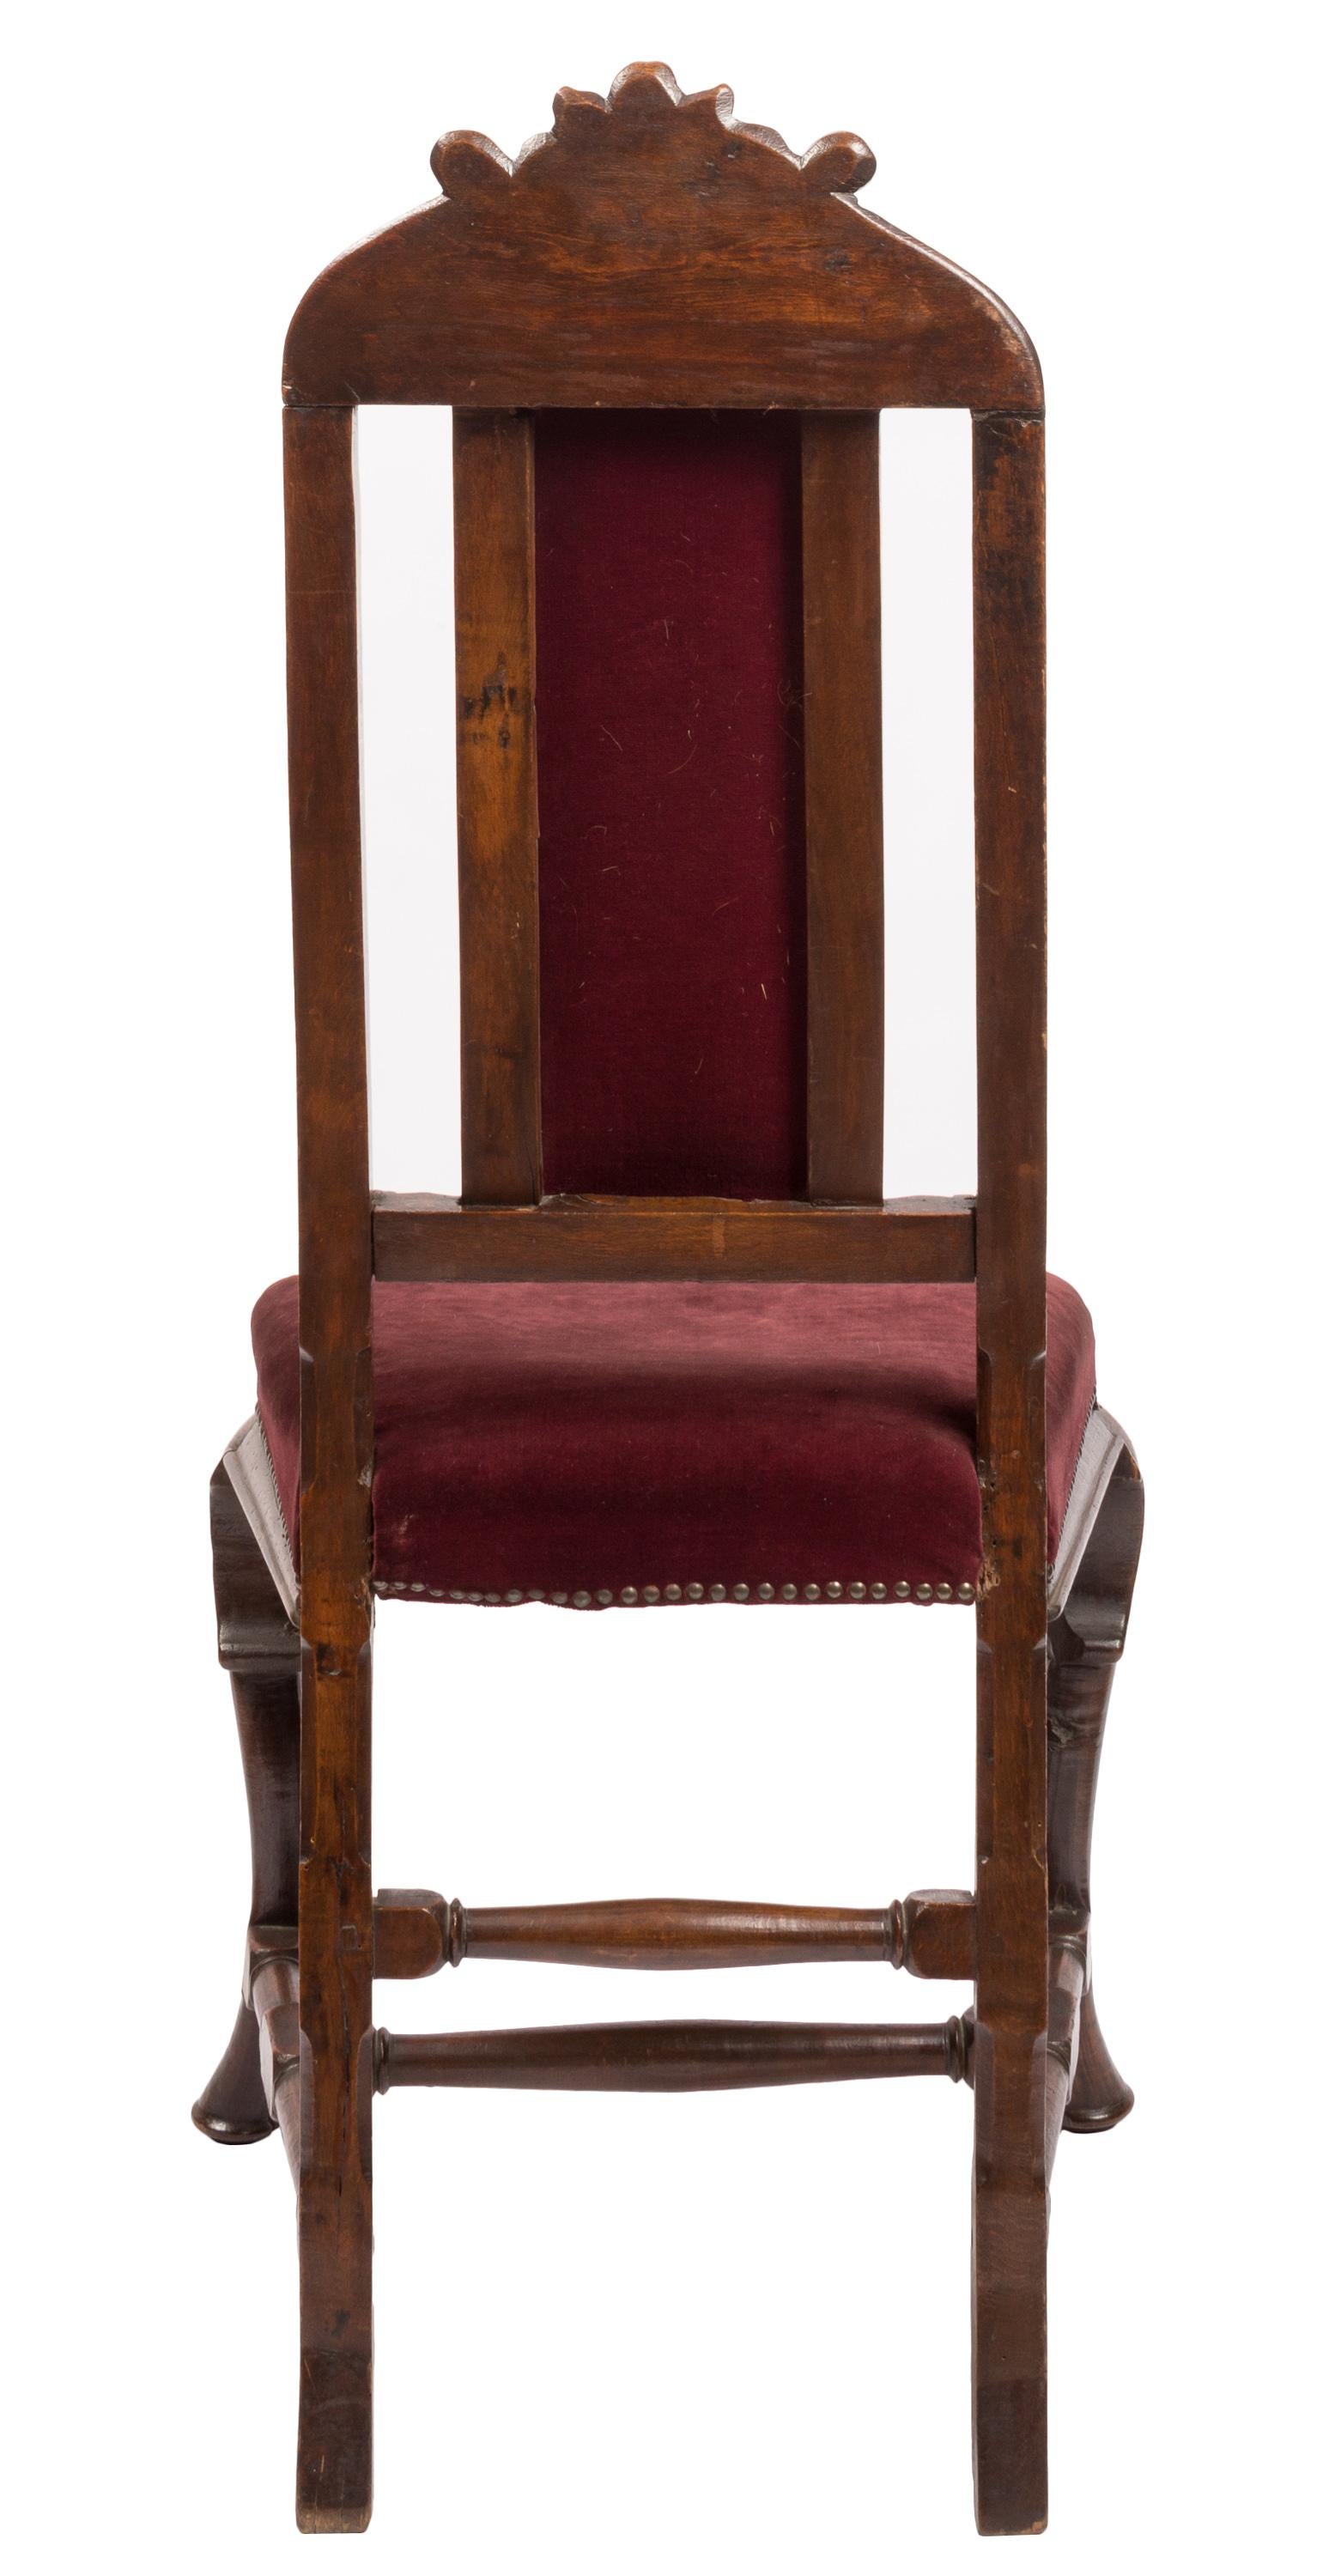 William and Mary Pair of William & Mary / Queen Anne Style Chairs with Burgundy Velvet Upholstery For Sale